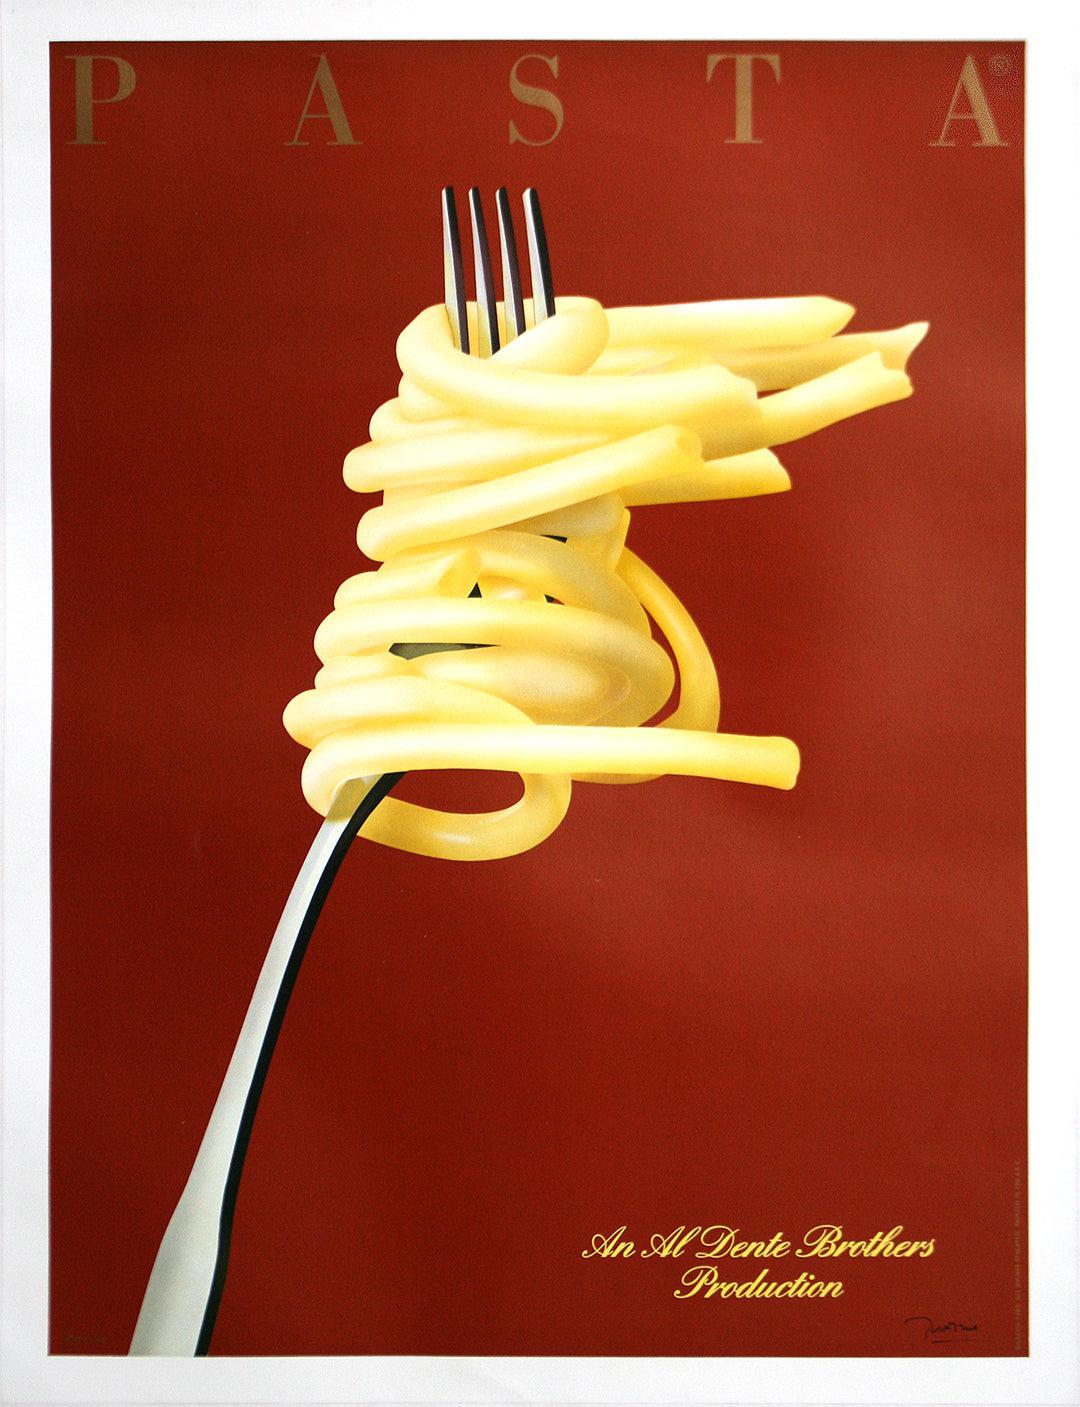 Original Vintage Pasta Poster by Razzia Signed Small c1985